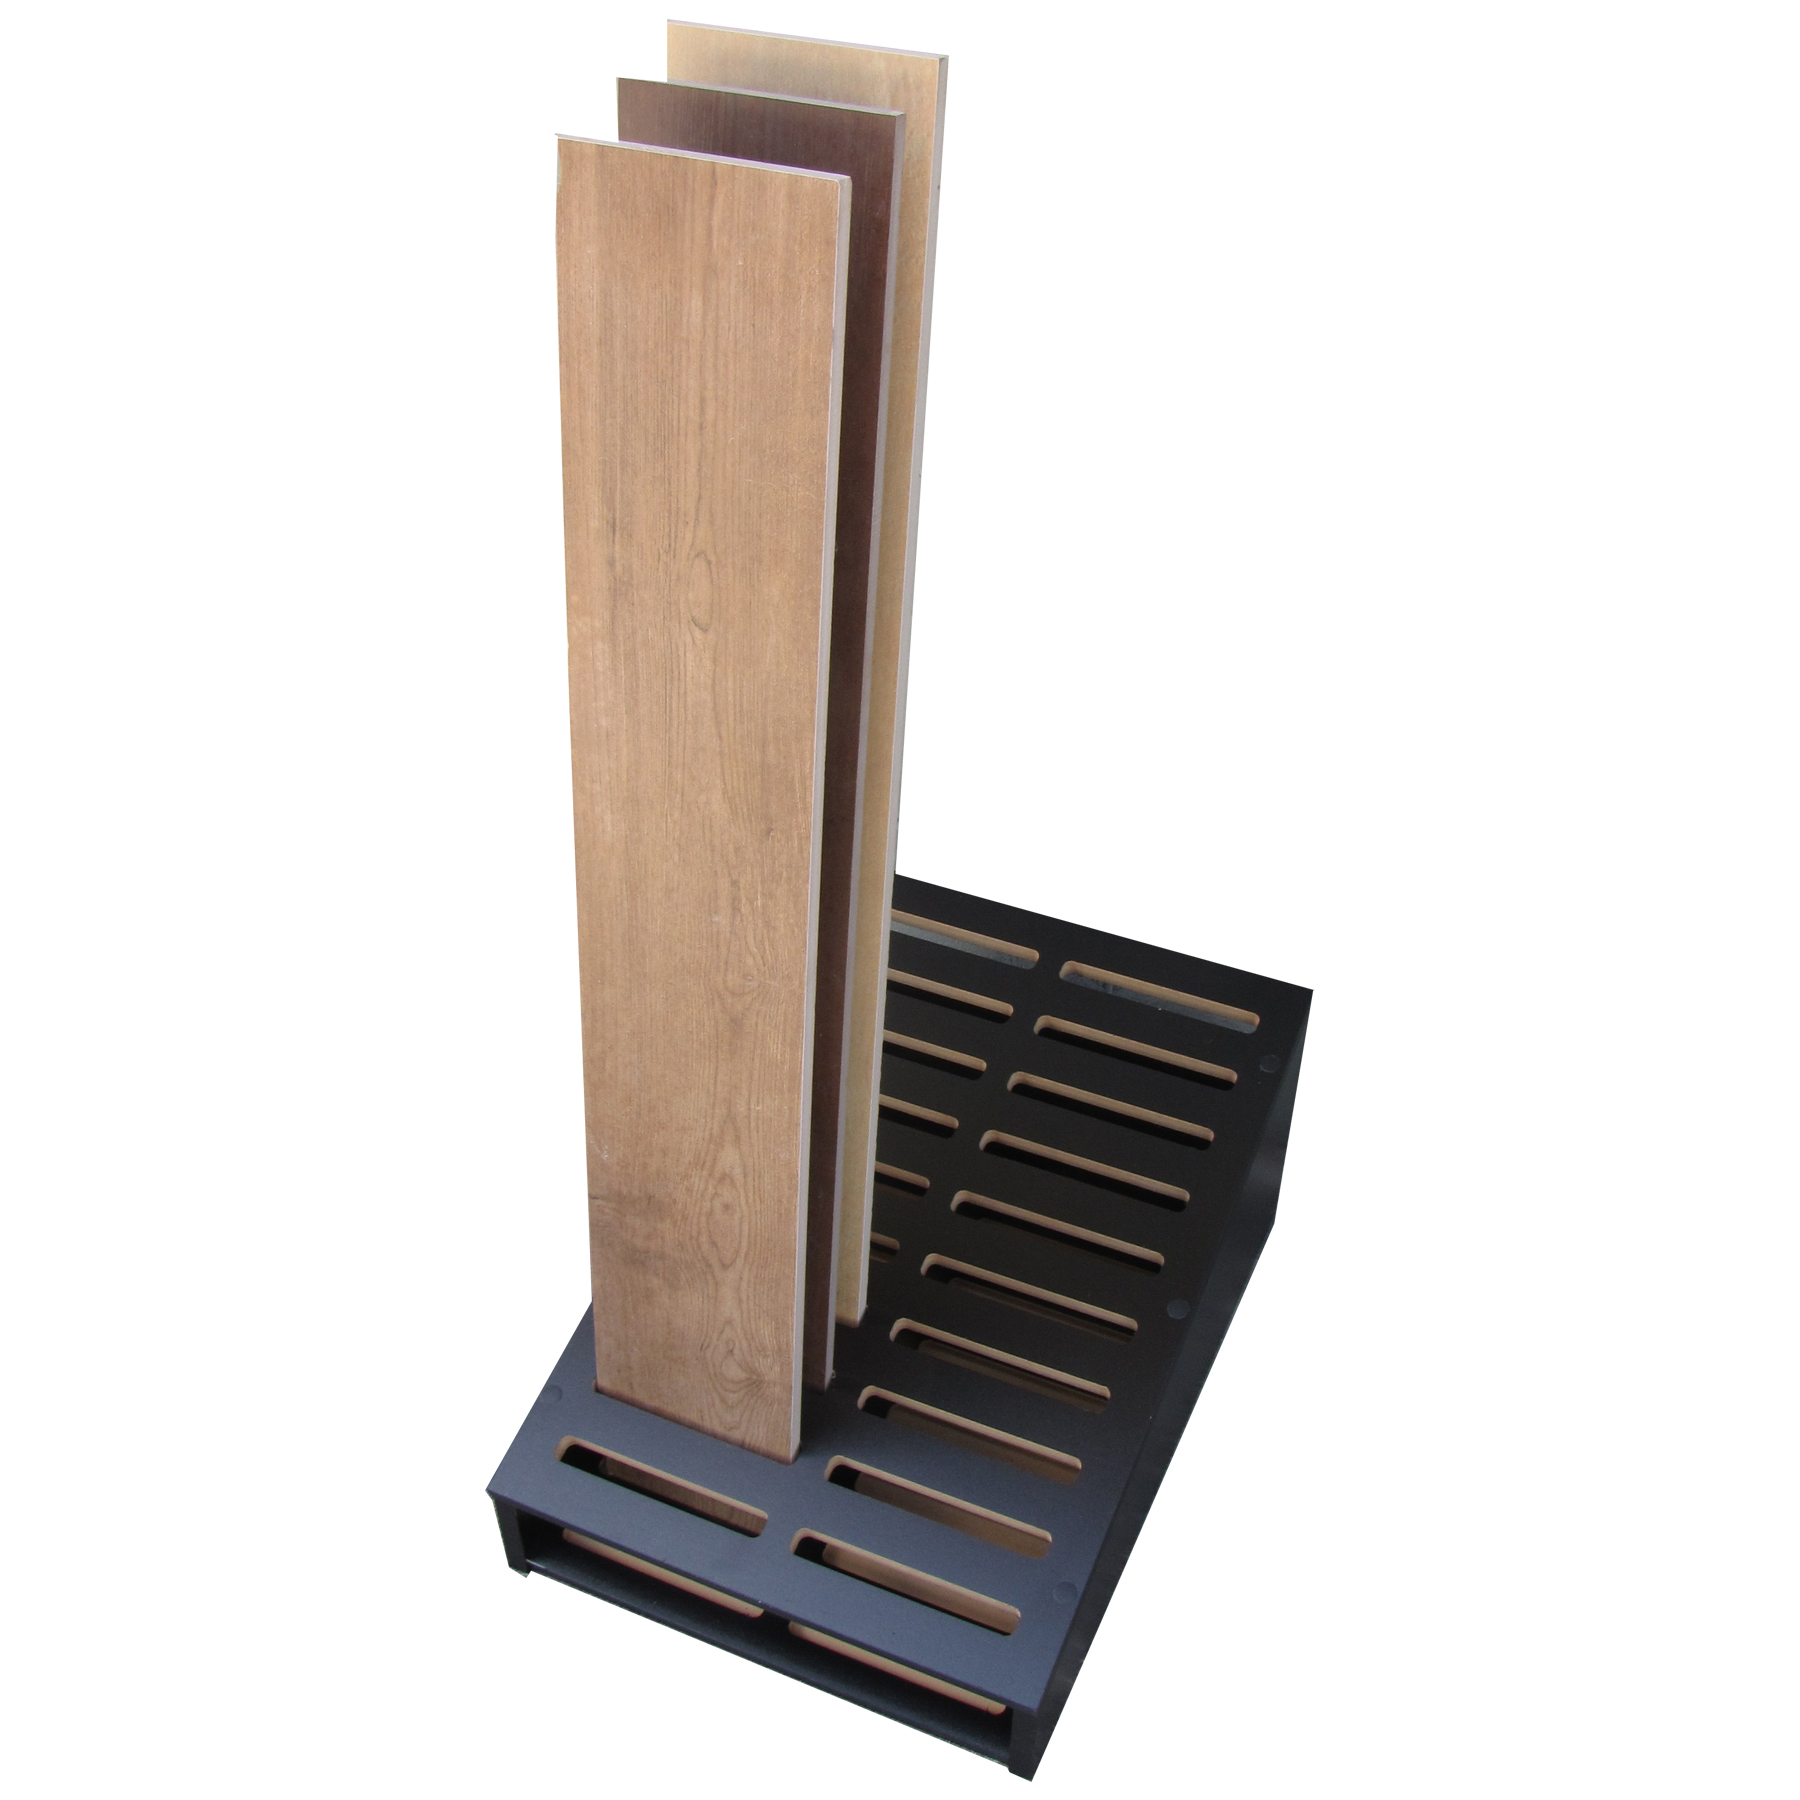 Sturdy Wood Construction the CD26 Slotted Waterfall Style Display Ships Fully Assembled